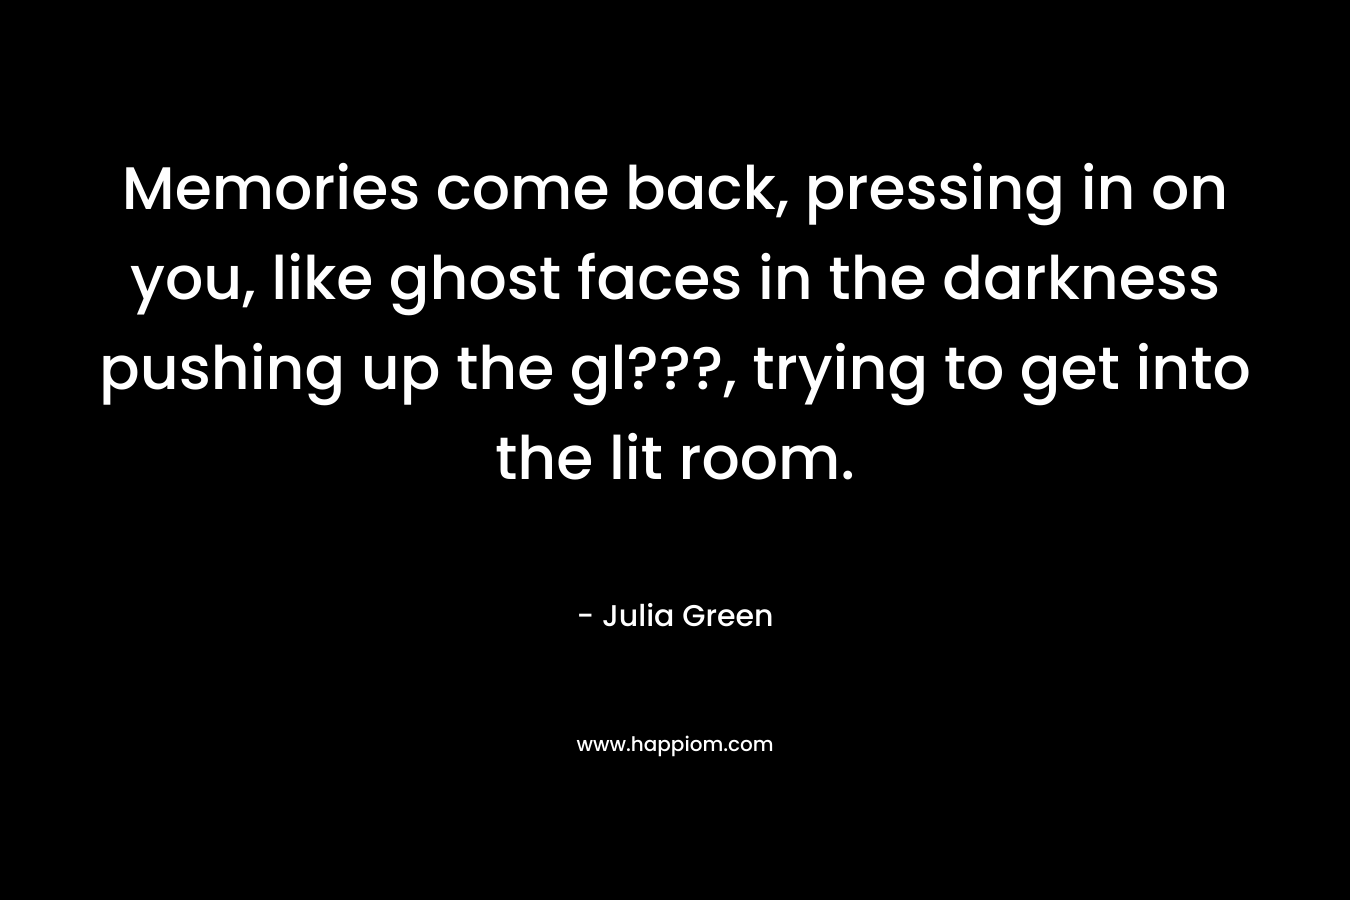 Memories come back, pressing in on you, like ghost faces in the darkness pushing up the gl???, trying to get into the lit room. – Julia Green